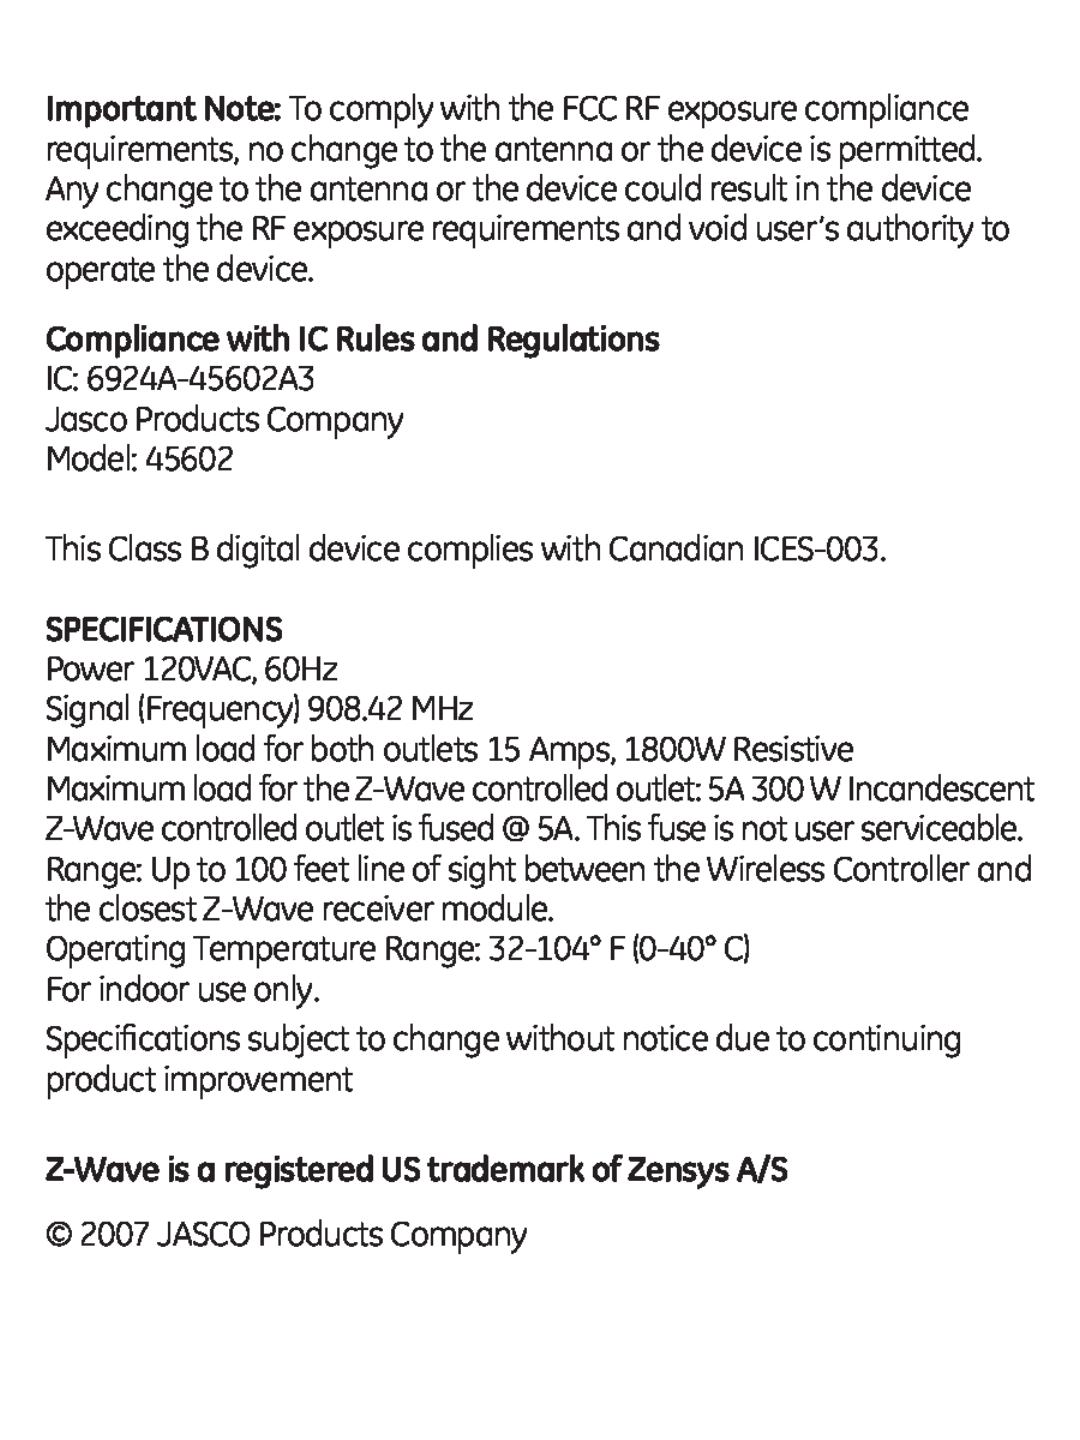 GE 45602 manual Compliance with IC Rules and Regulations, Z-Waveis a registered US trademark of Zensys A/S 